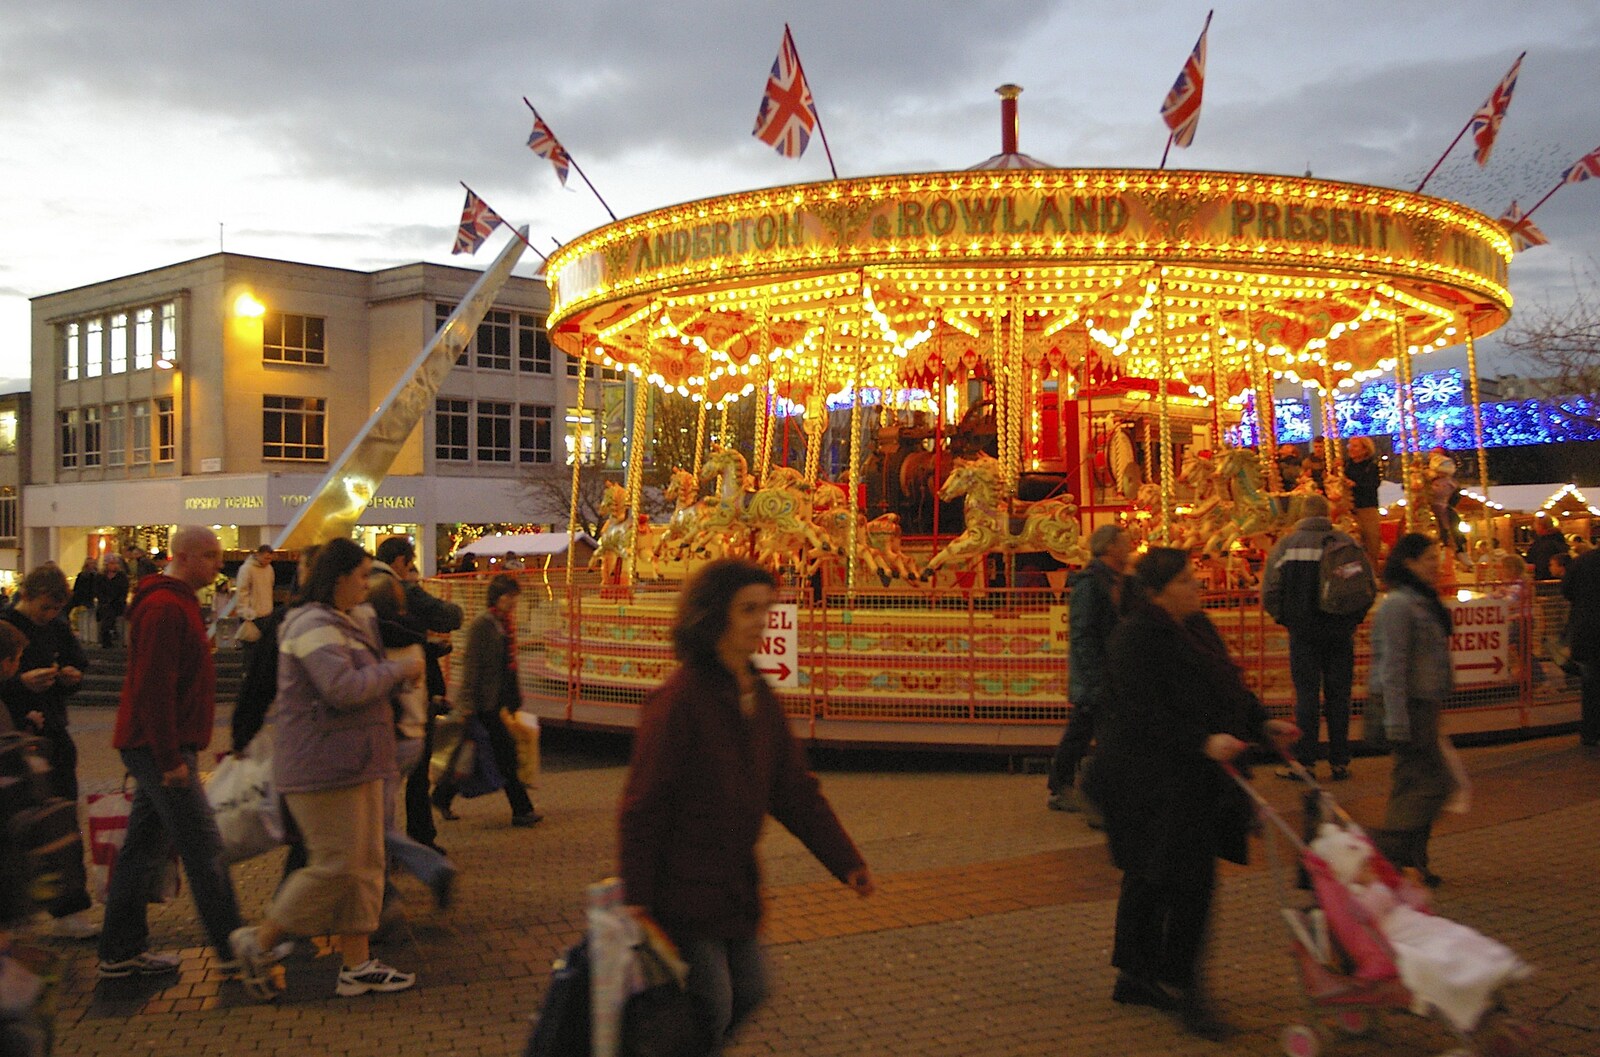 An Anderton and Rowland carousel from Uni: A Polytechnic Reunion, Plymouth, Devon - 17th December 2005